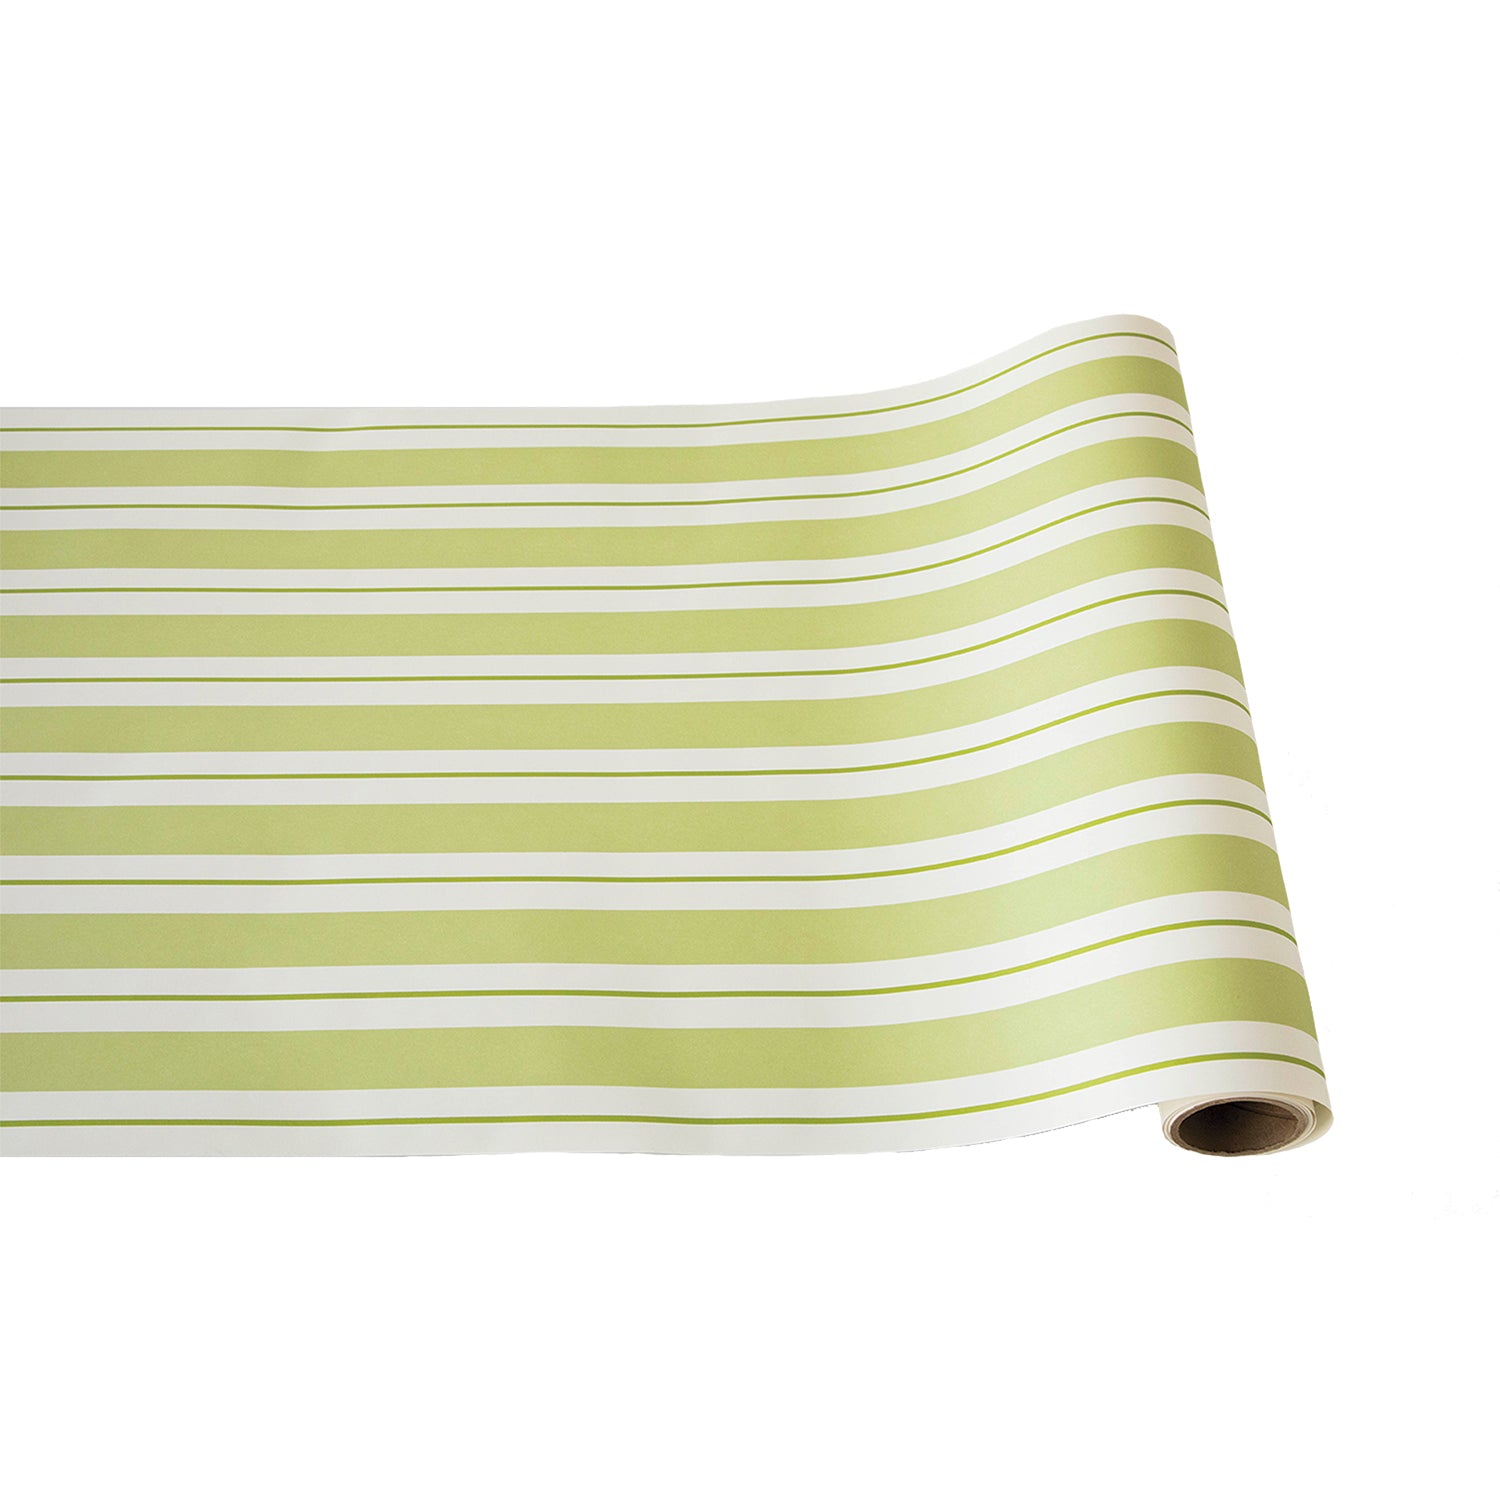 The Hester &amp; Cook Green Awning Stripe Runner is perfect for year round celebrations and everyday use. The runner features a vibrant green and white striped design that stands out on any white background.